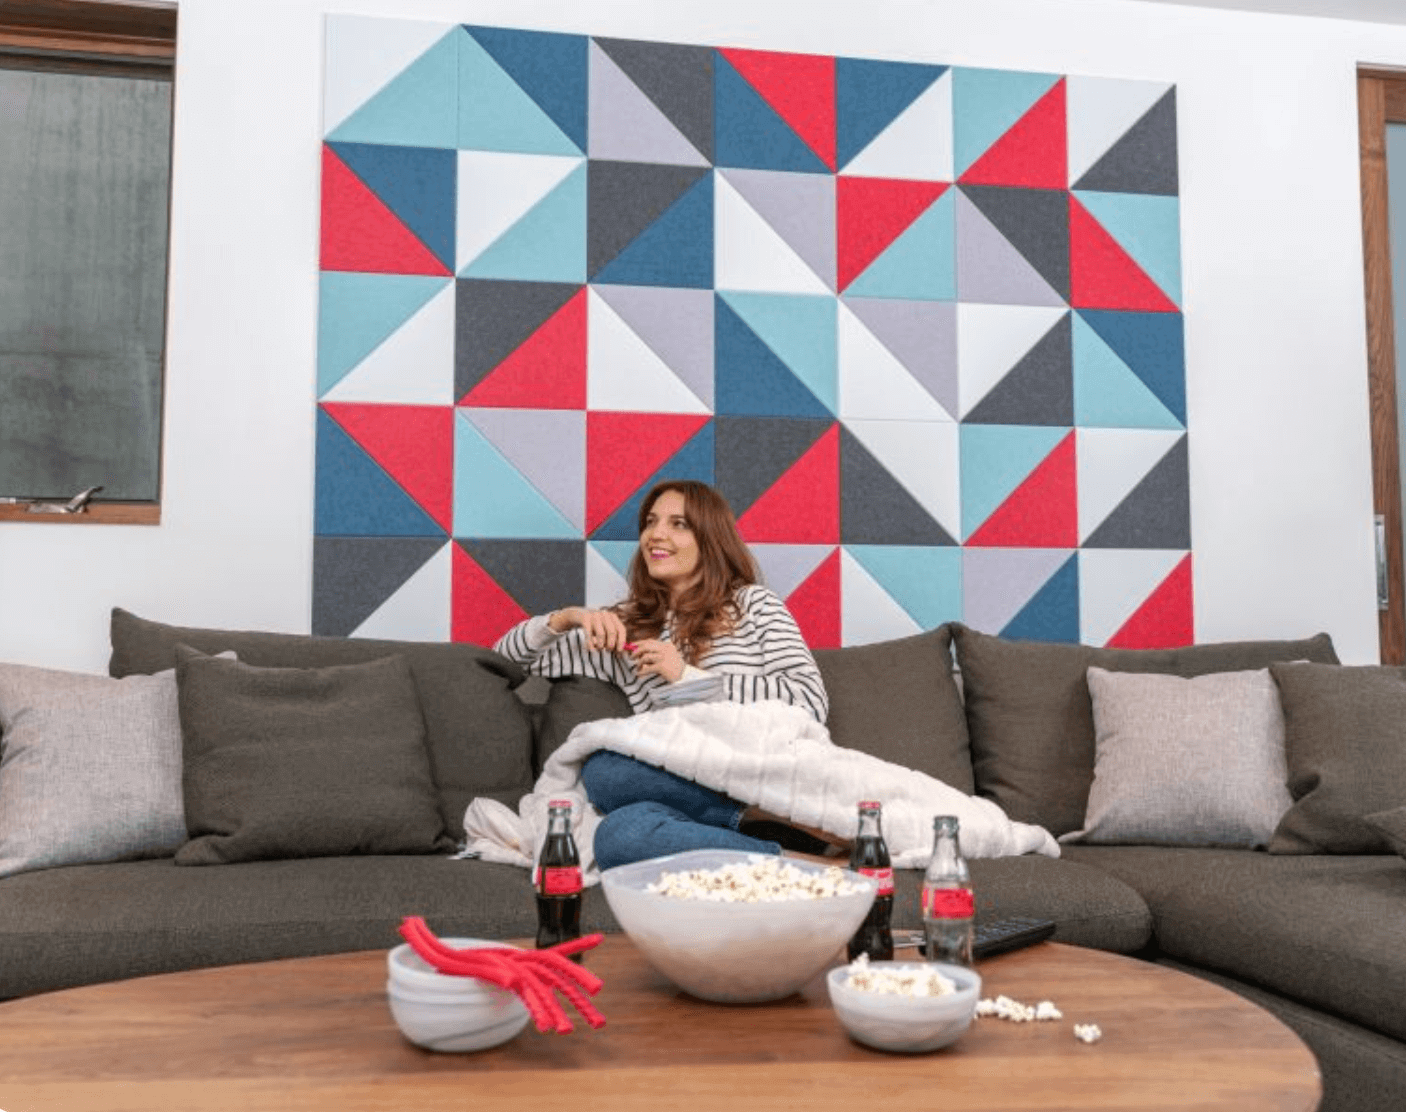 Acoustic wall tile graphic with woman